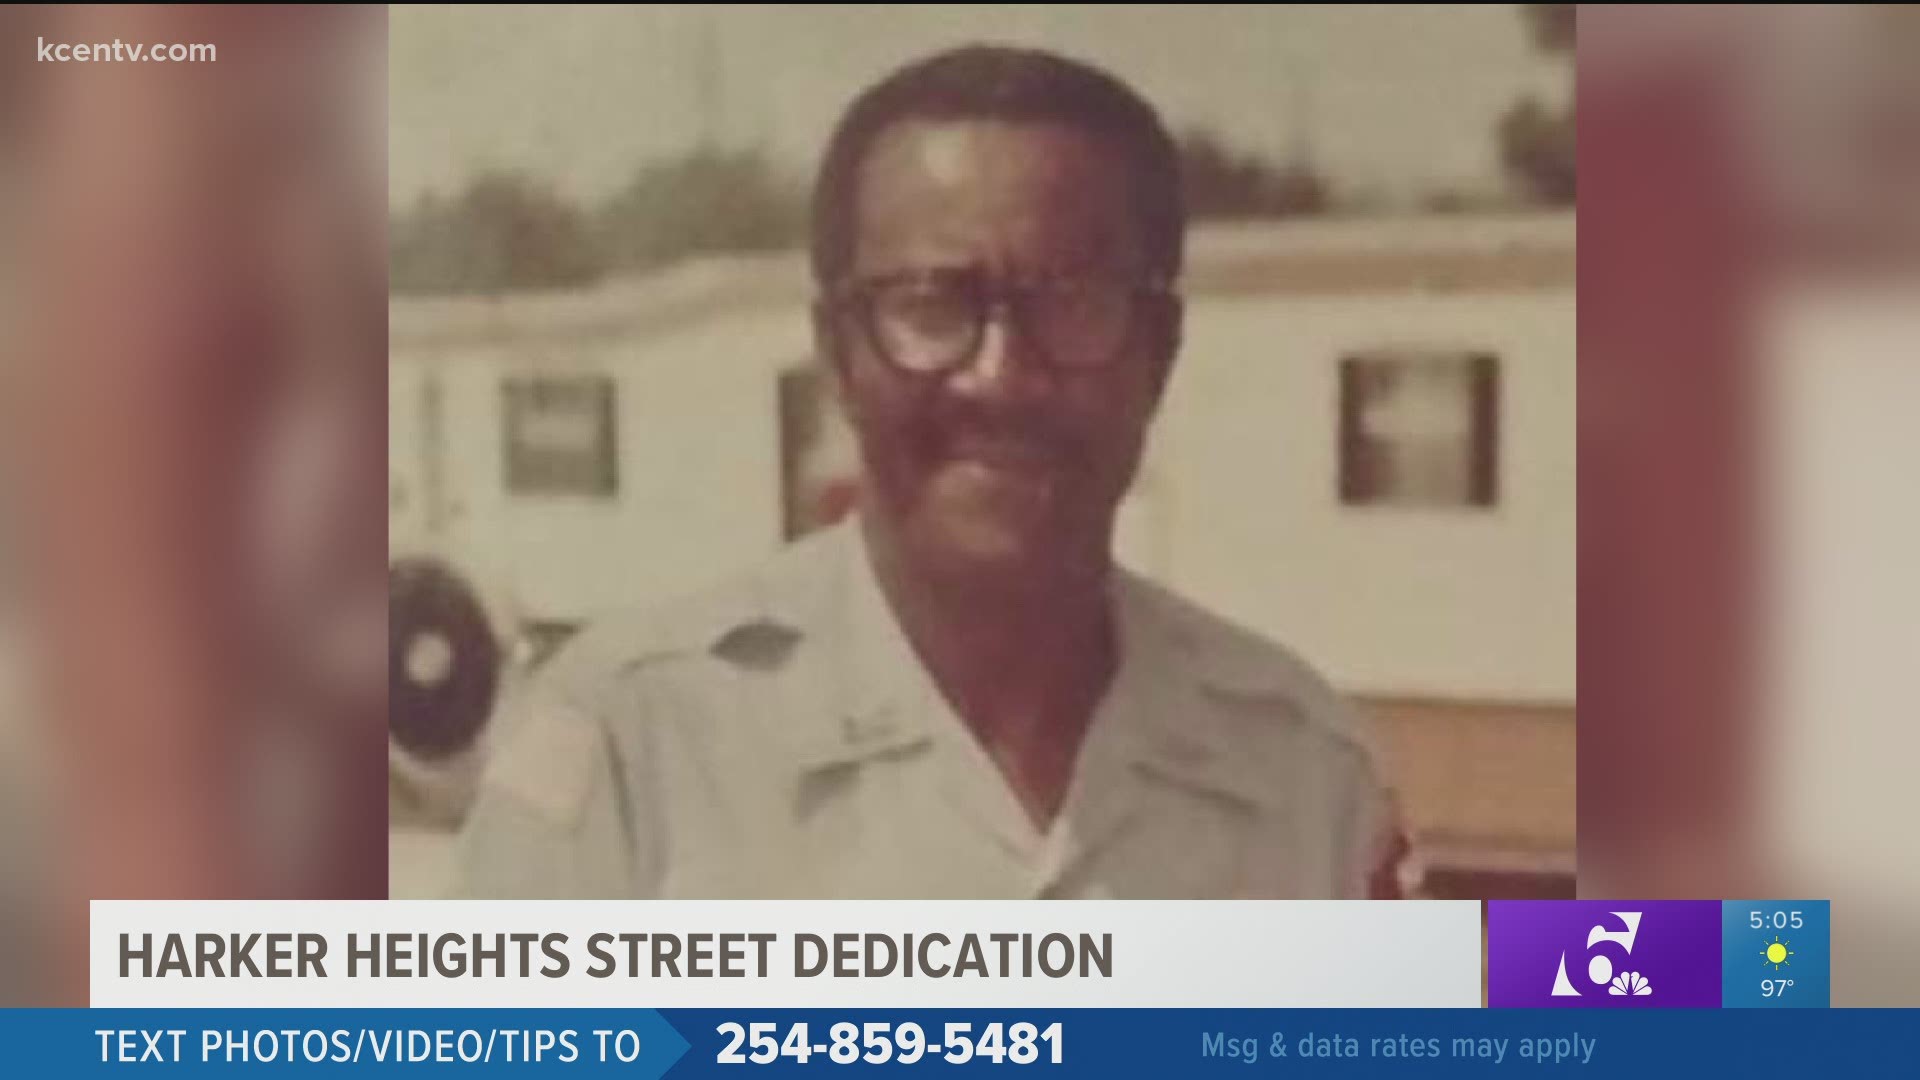 Freddie Nichols, Sr. joined the department in 1972 and was the first African American police officer in the city.